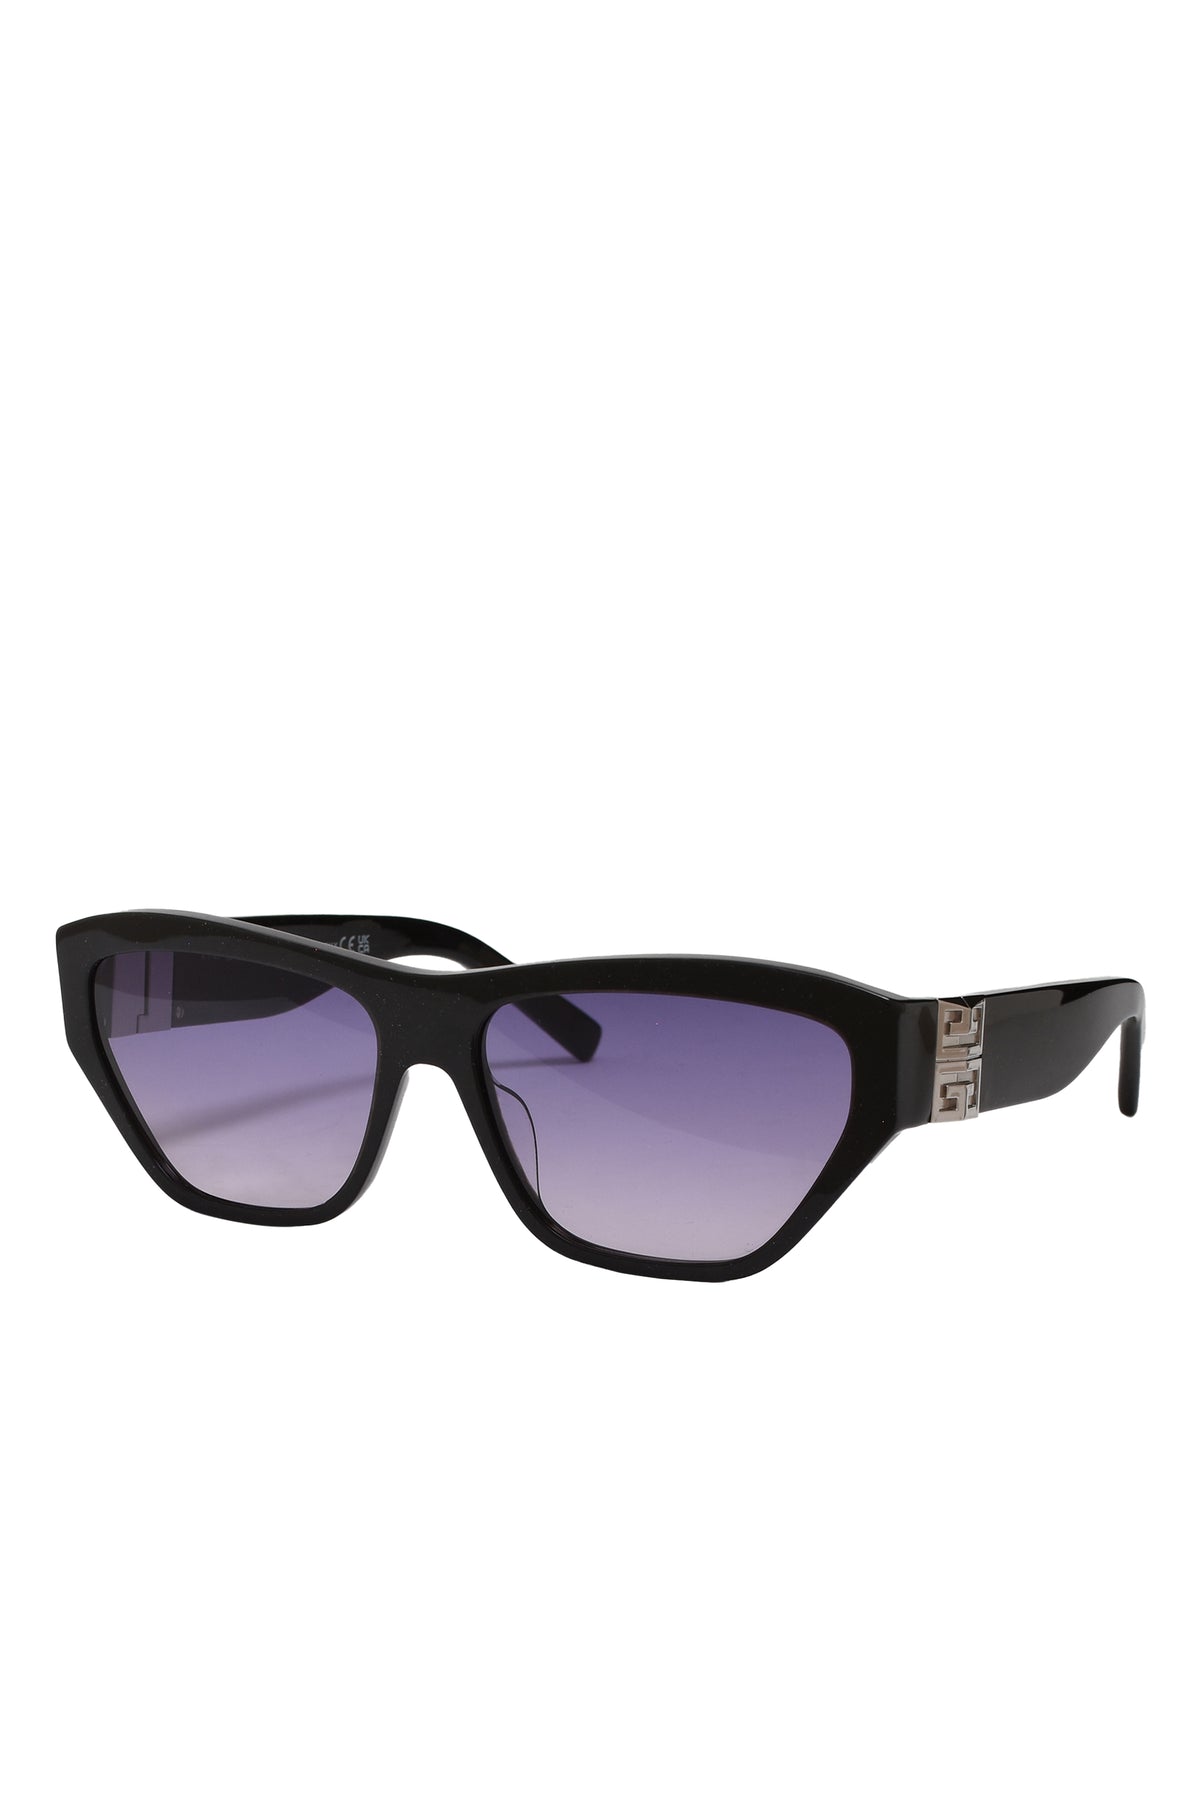 SUNGLASSES/BLK/OTHER/GRADIENT OR MIRROR VIOLET